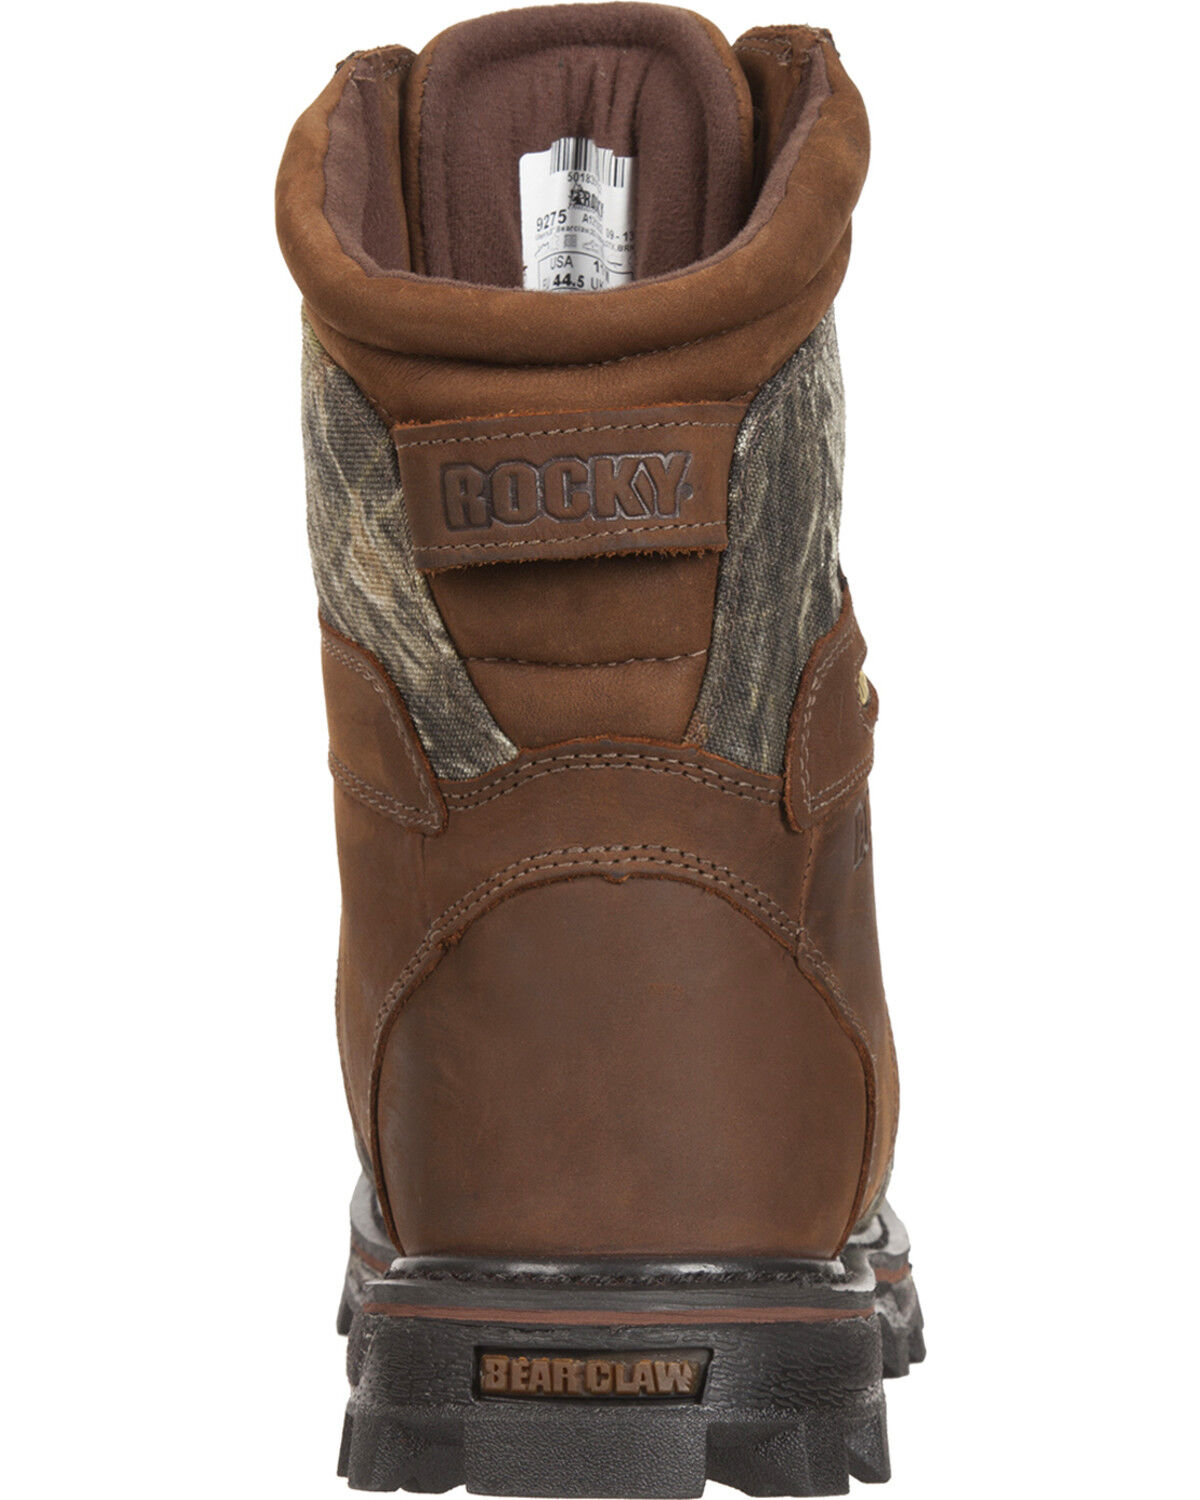 Rocky Men's Bear Claw Hunting Boots 